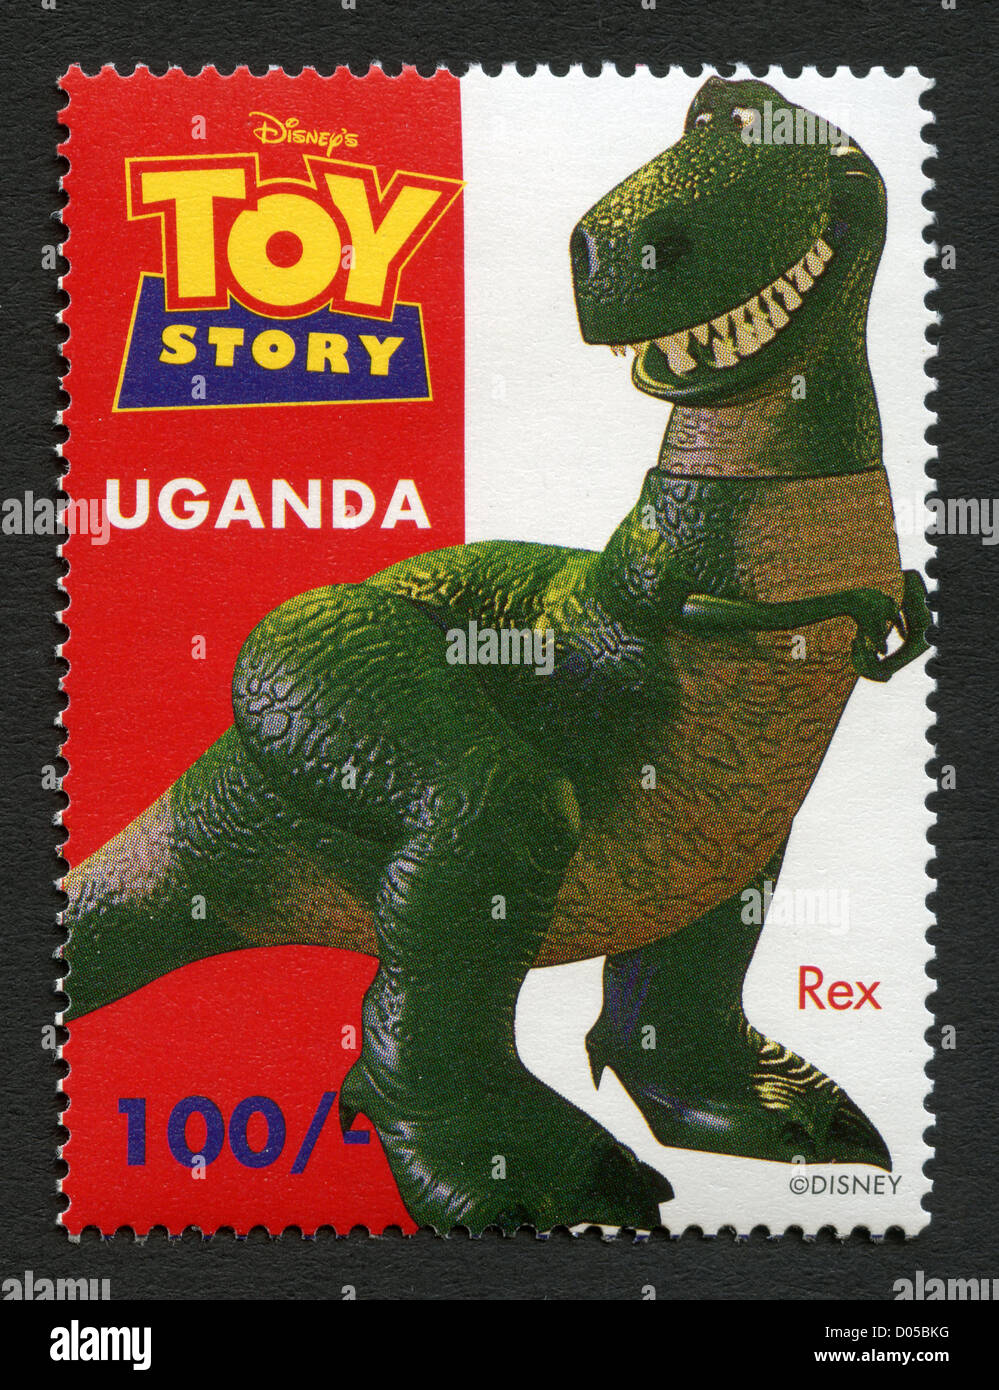 Uganda postage stamp depicting Disney cartoon character - Rex from Toy Story Stock Photo